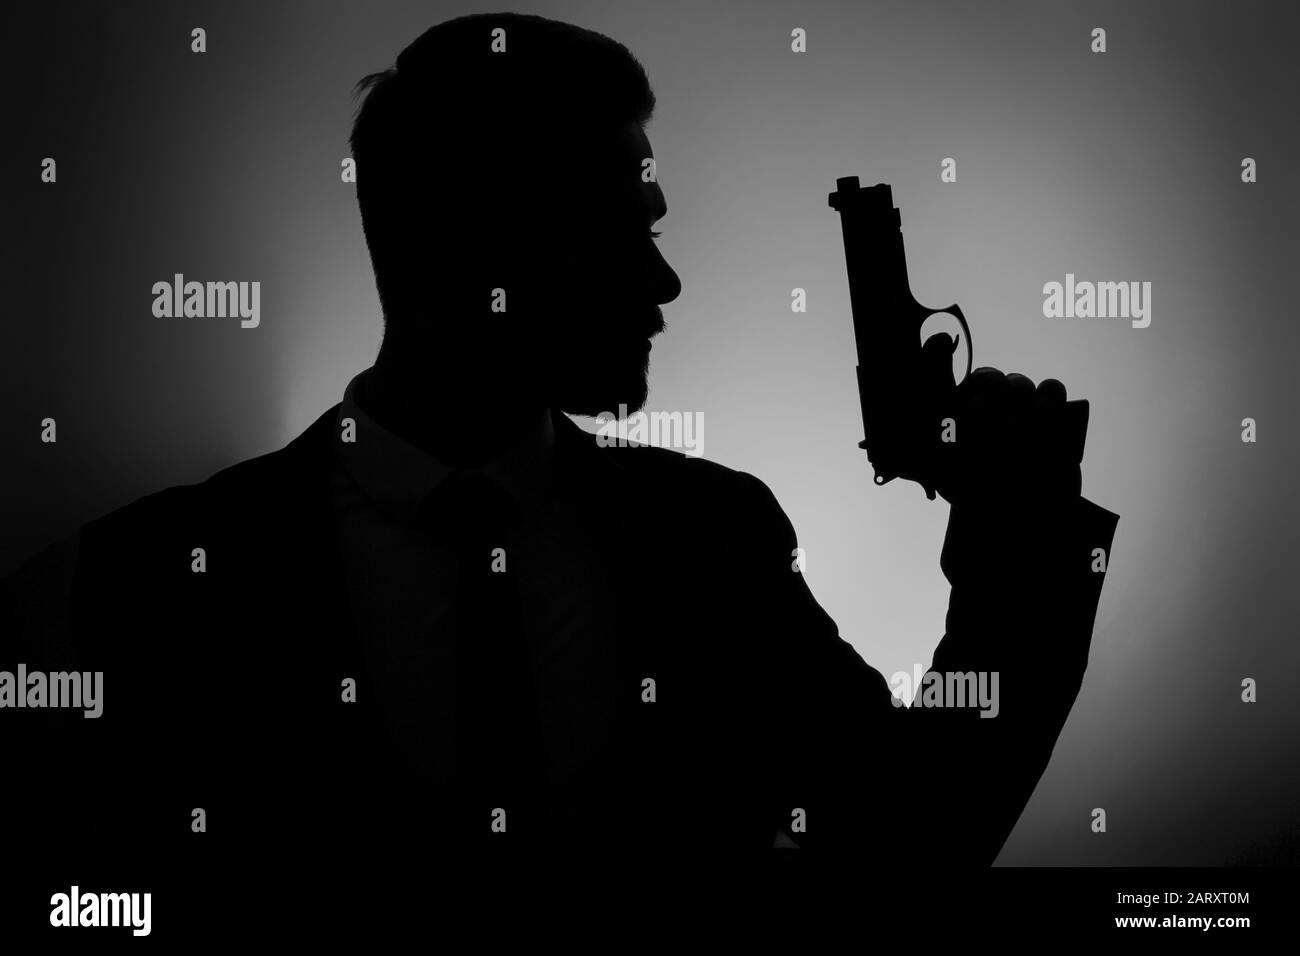 Silhouette of male agent with gun on dark background Stock Photo